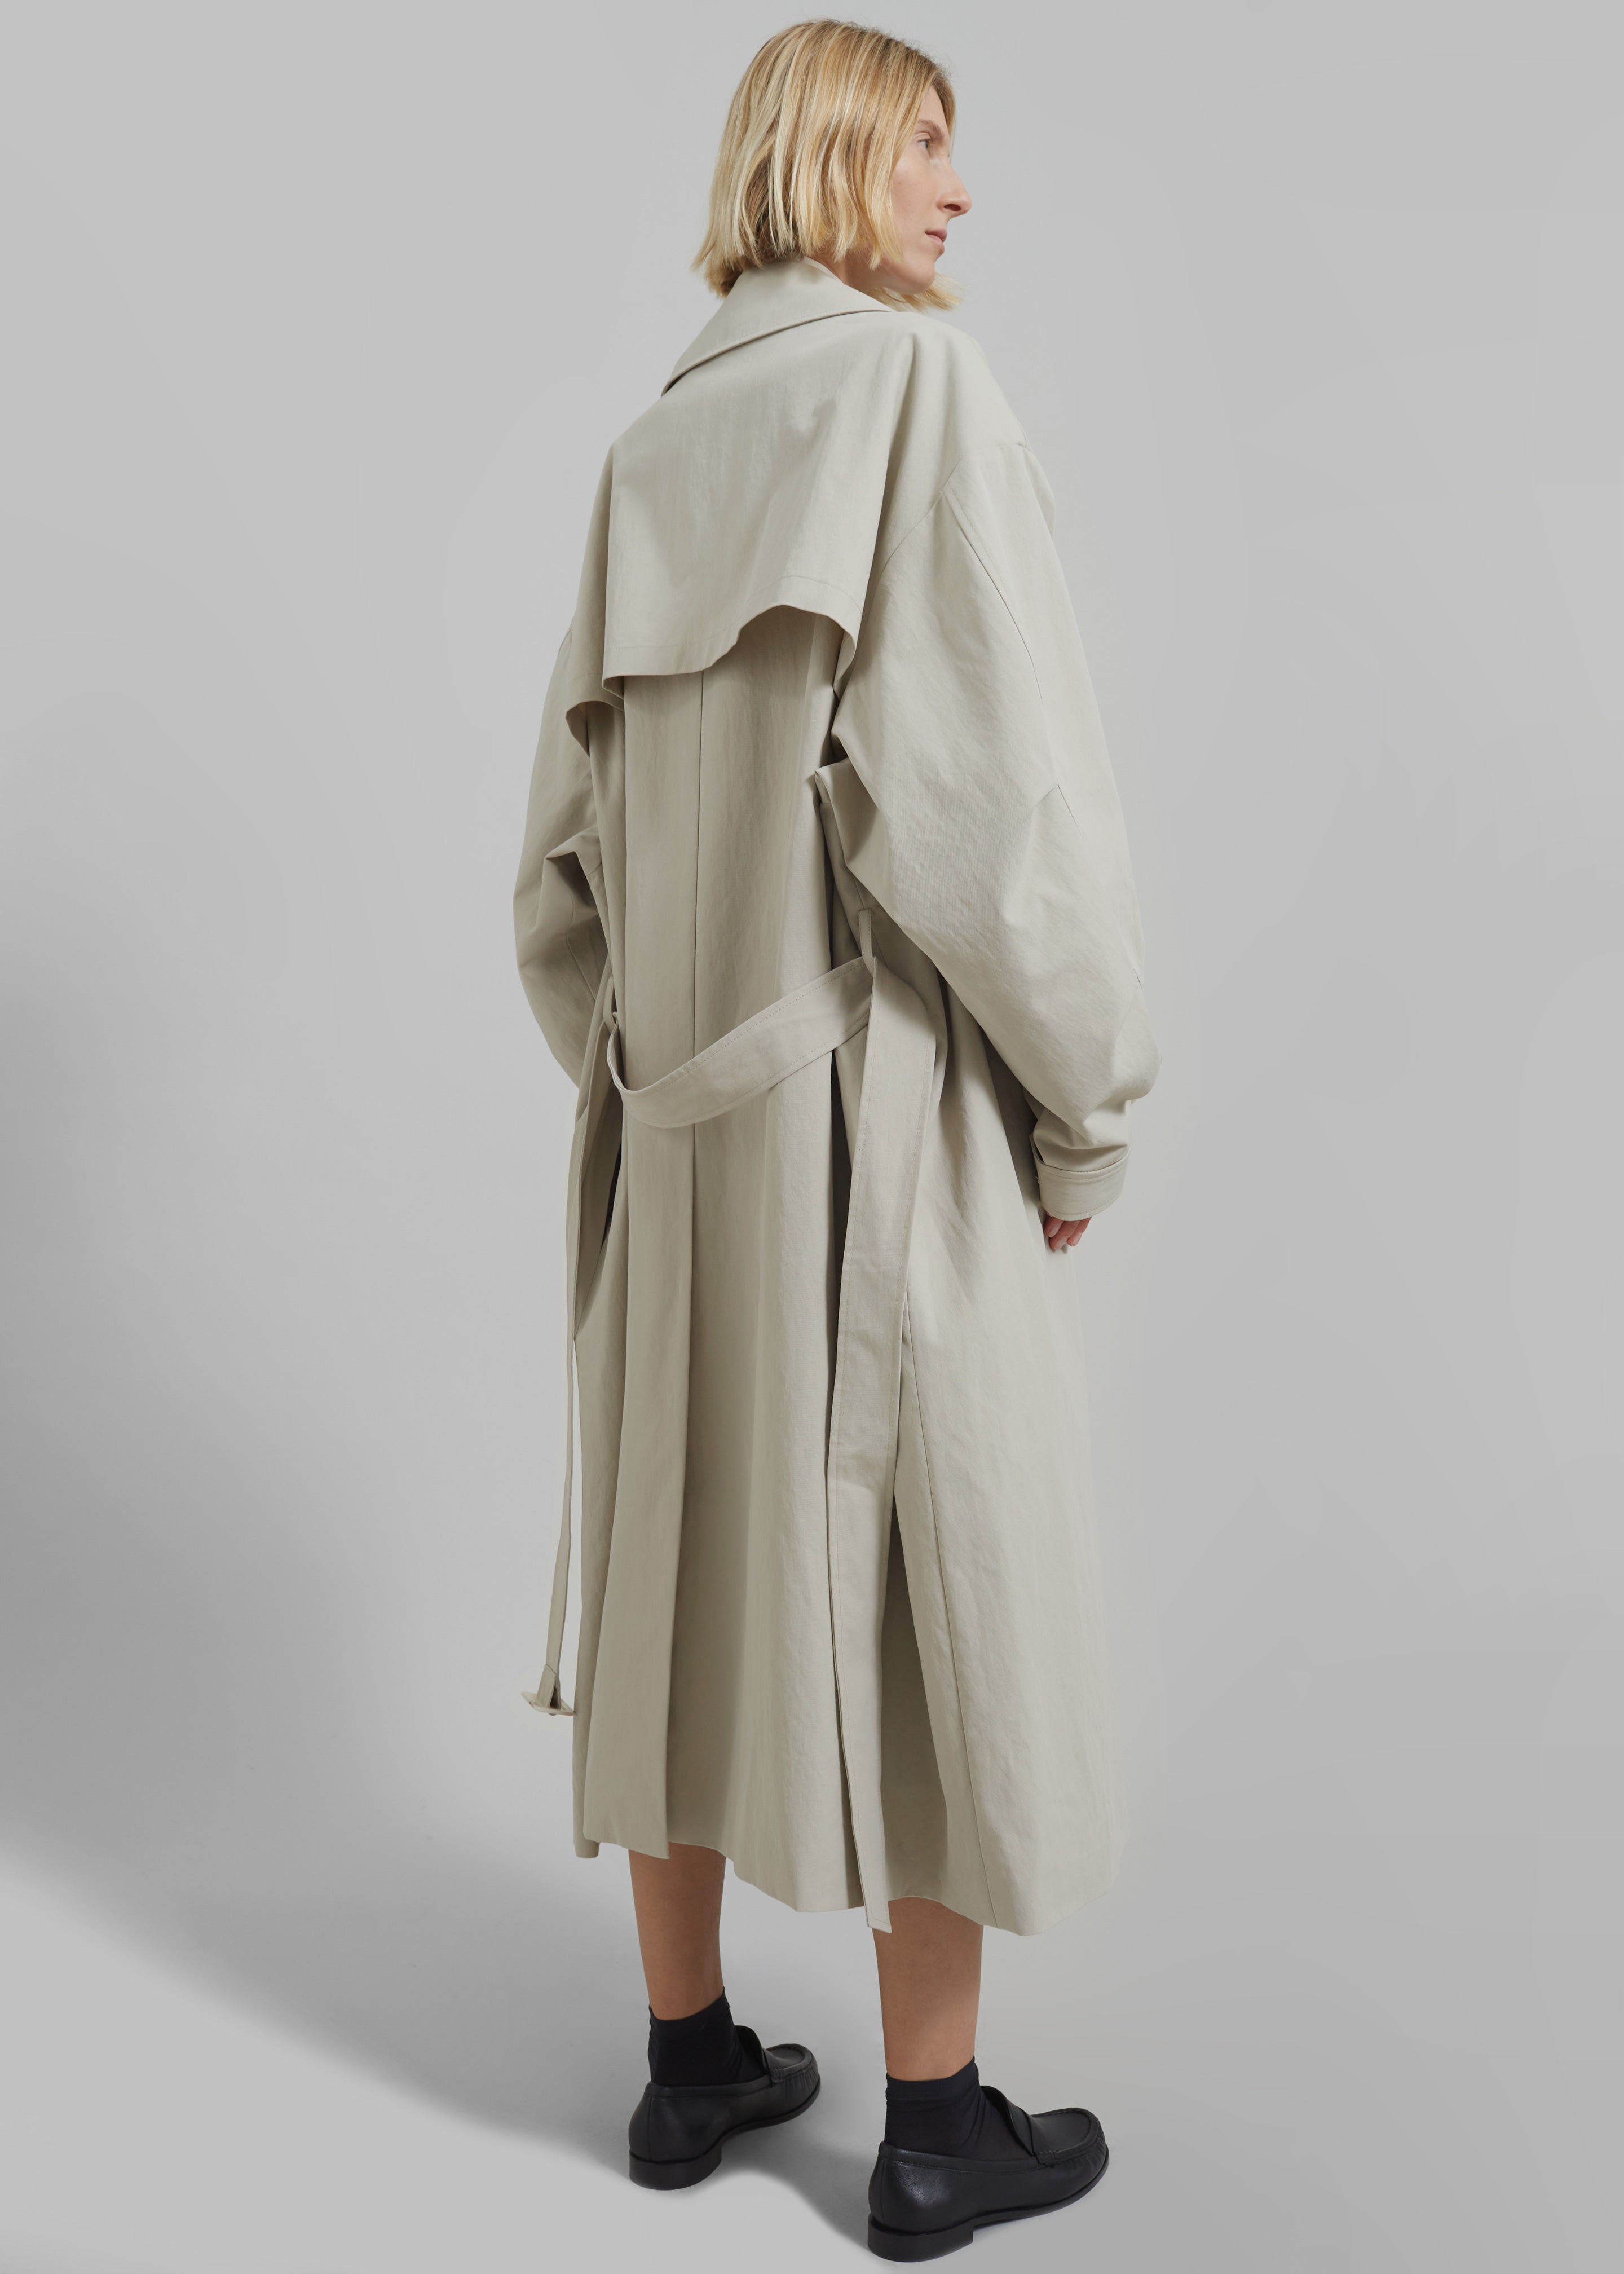 Anika Double Breasted Trench Coat - Beige - 9